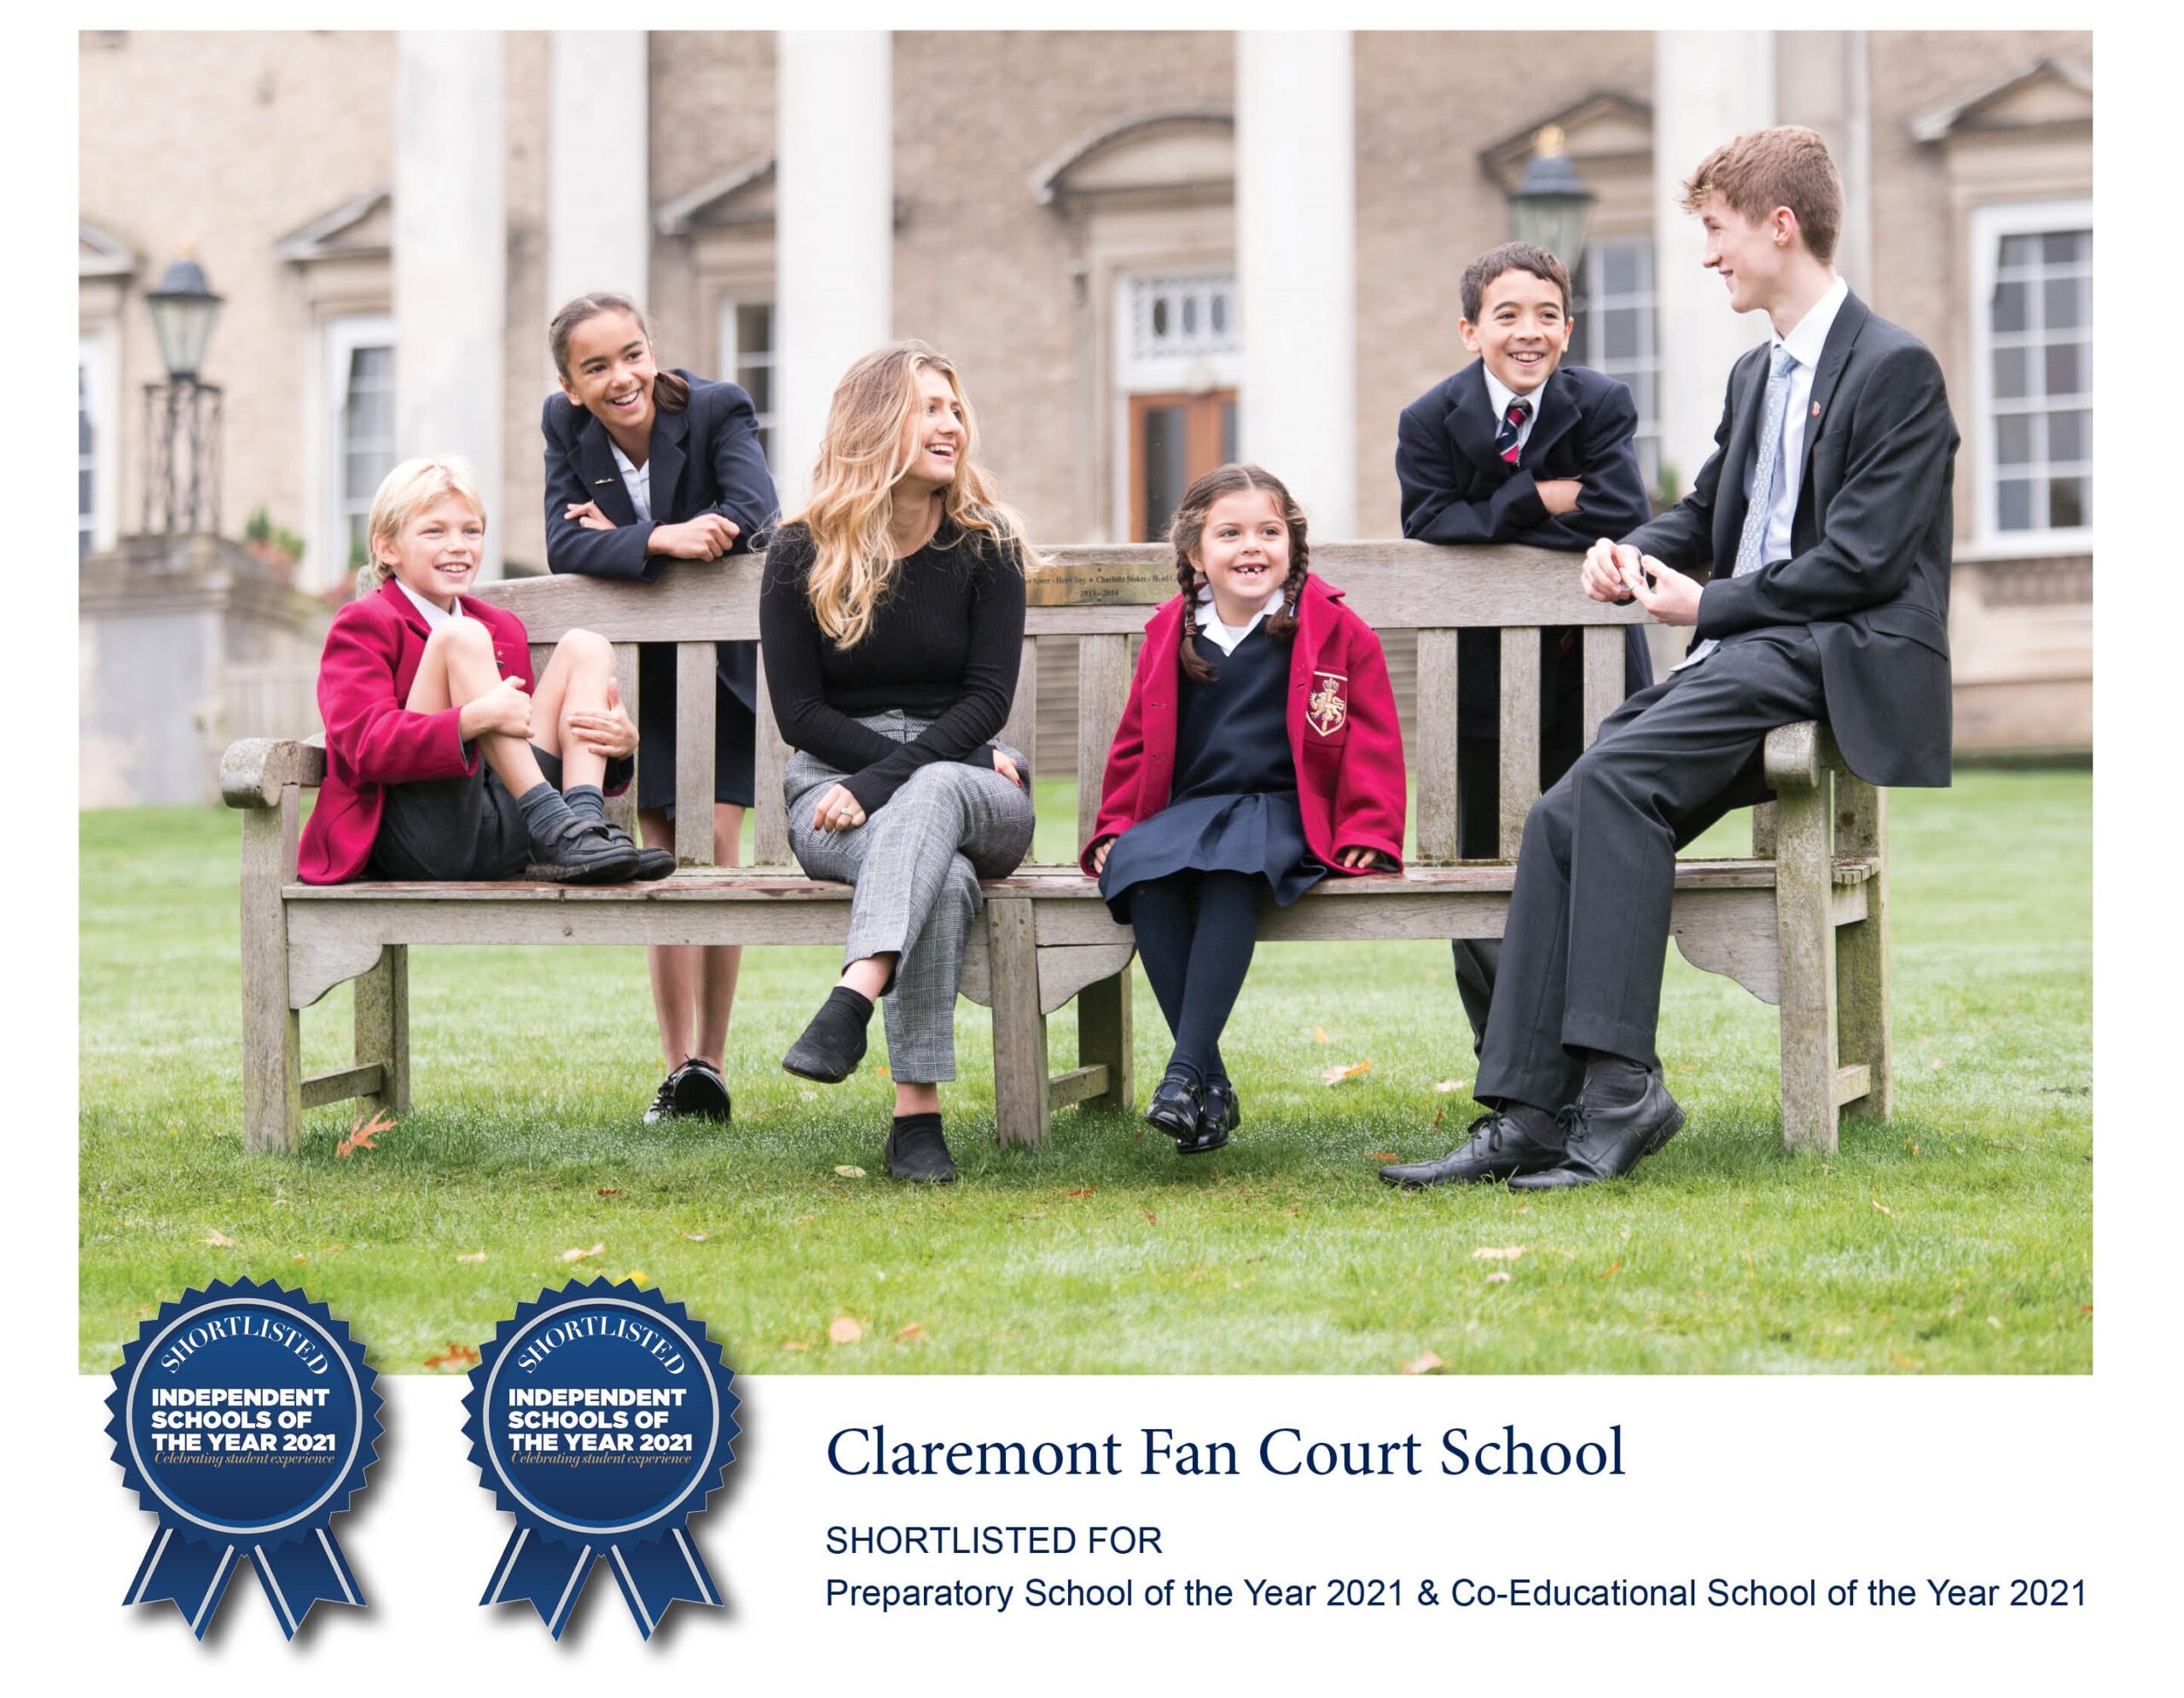 Claremont Fan Court School shortlisted for Independent Schools Awards 2021